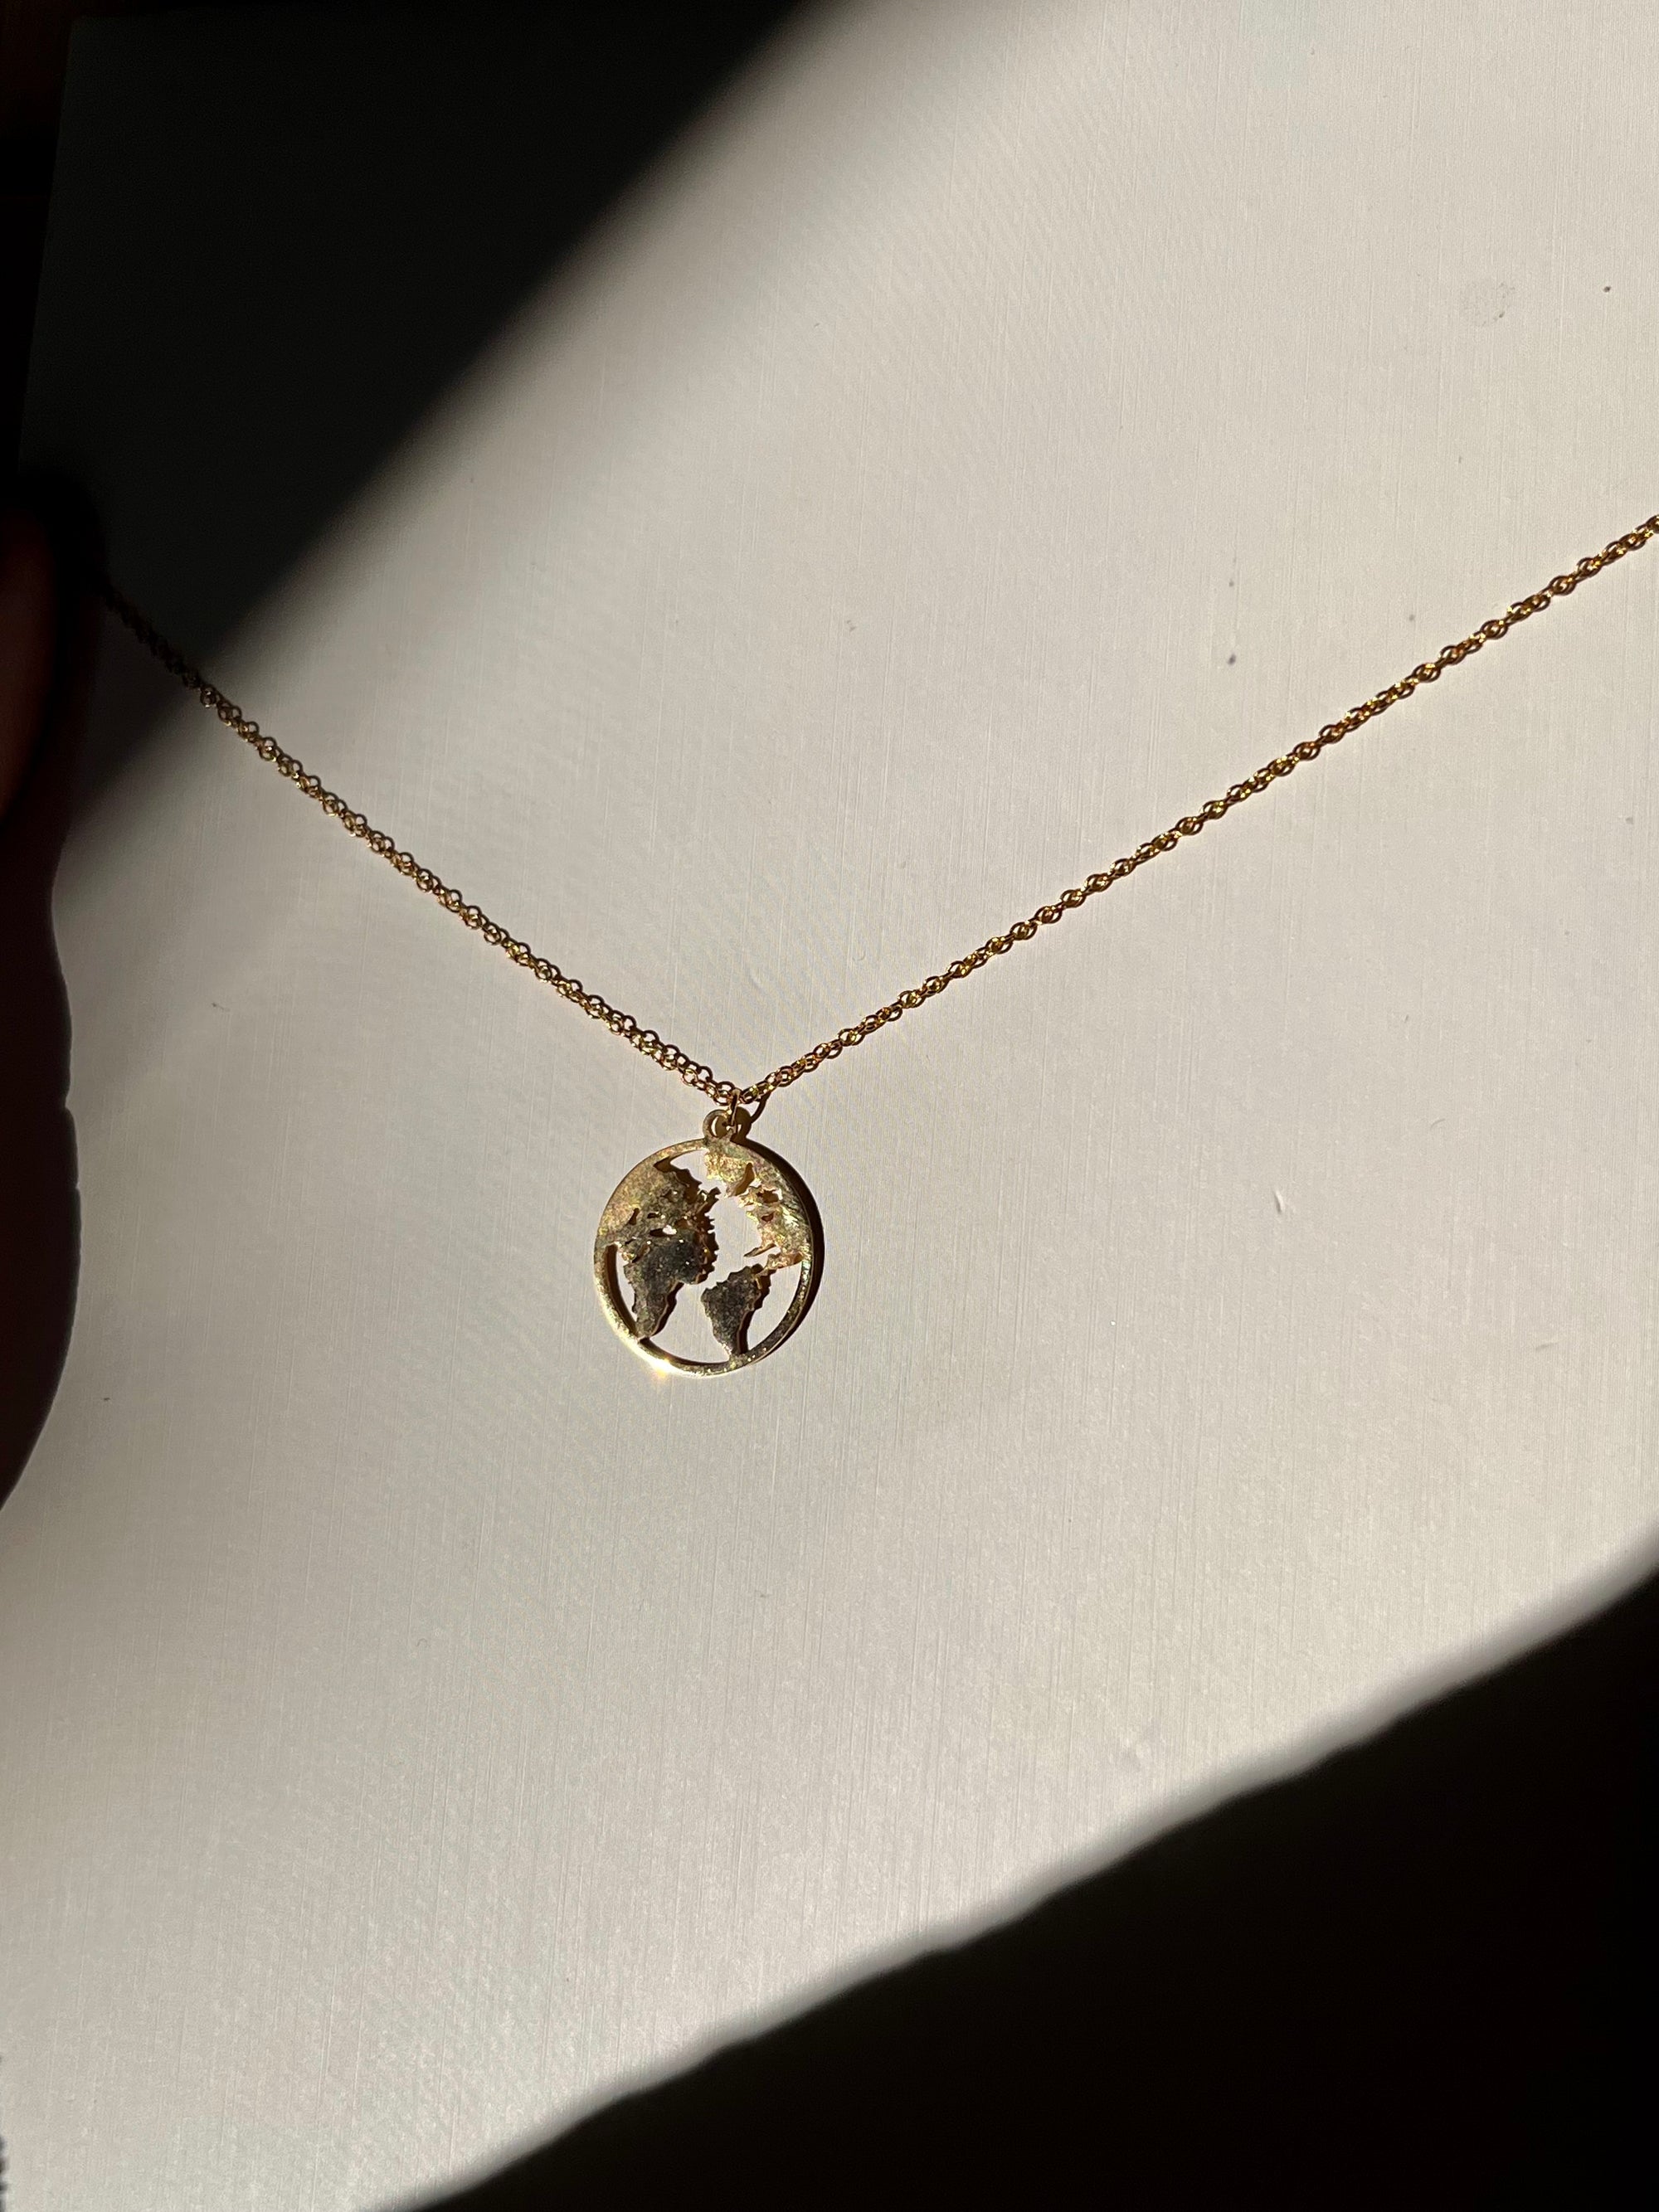 Gold “EARTH” necklace